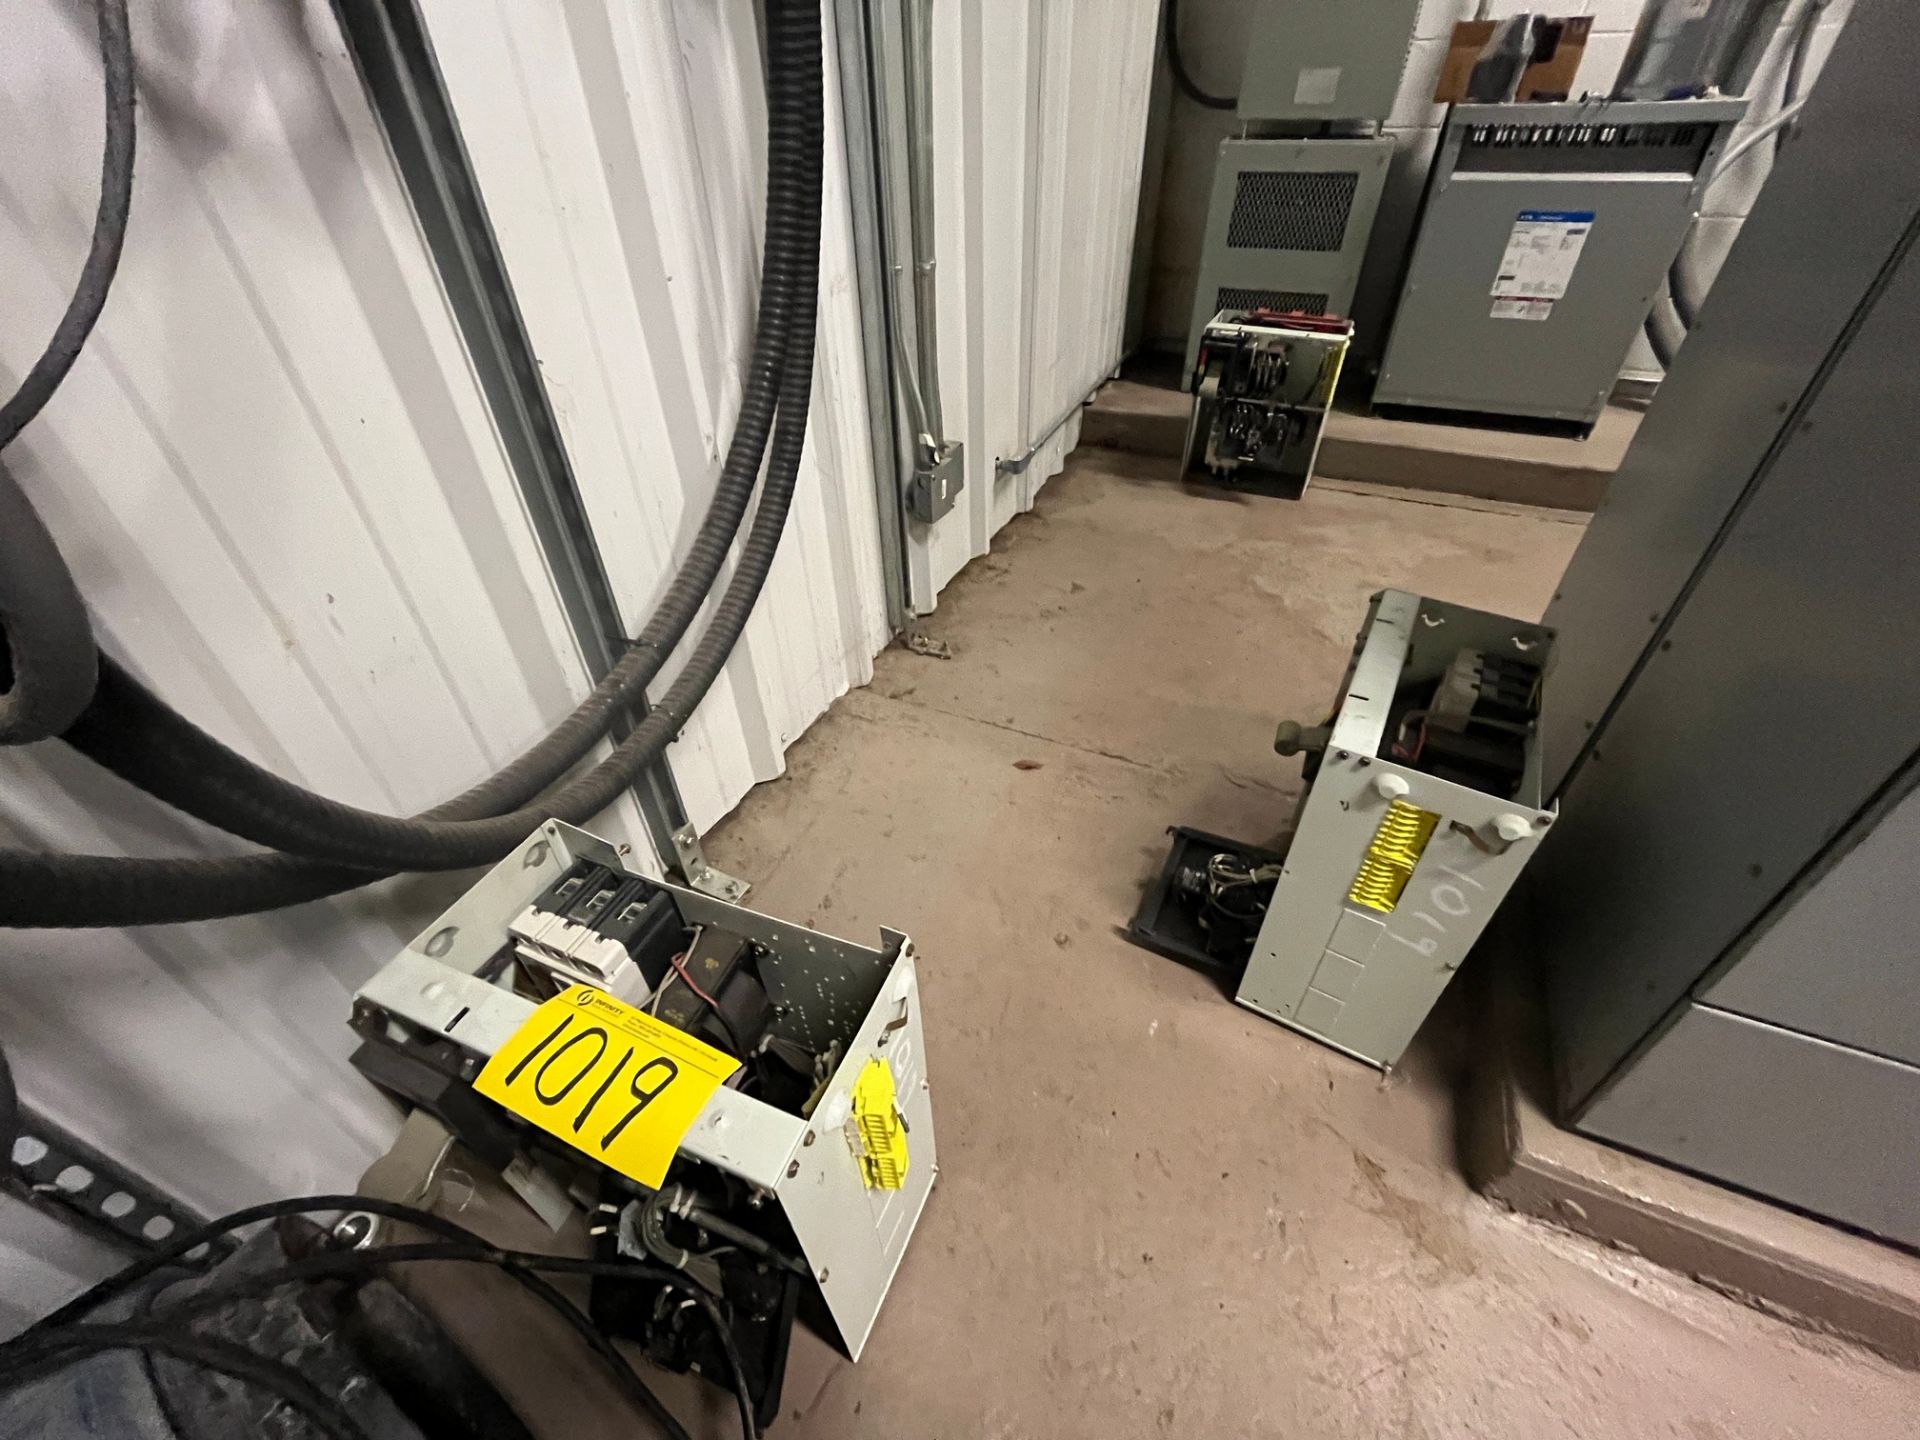 LOT OF (3) ELECTRICAL BOXES ON FLOOR (DEINKING ELECTRICAL SUBSTATION ROOM)